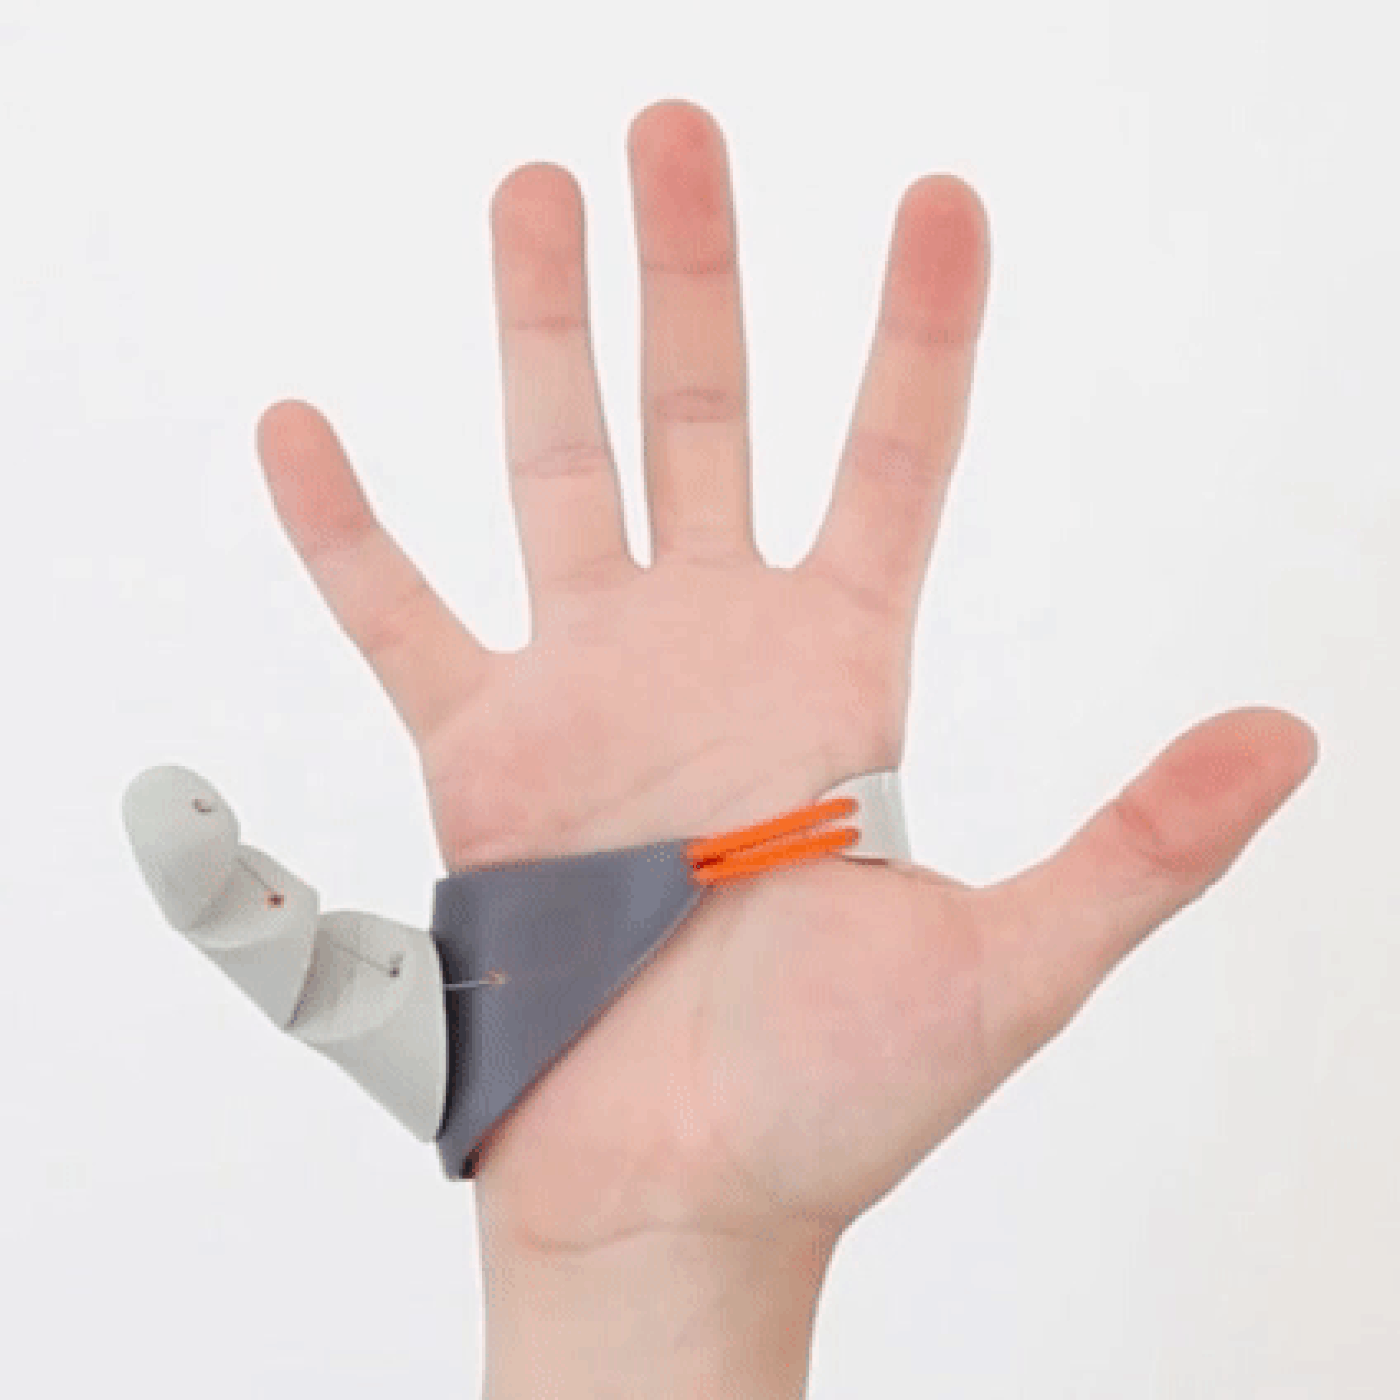 This 'third thumb' is the unnecessary prosthetic of my dreams - The ...